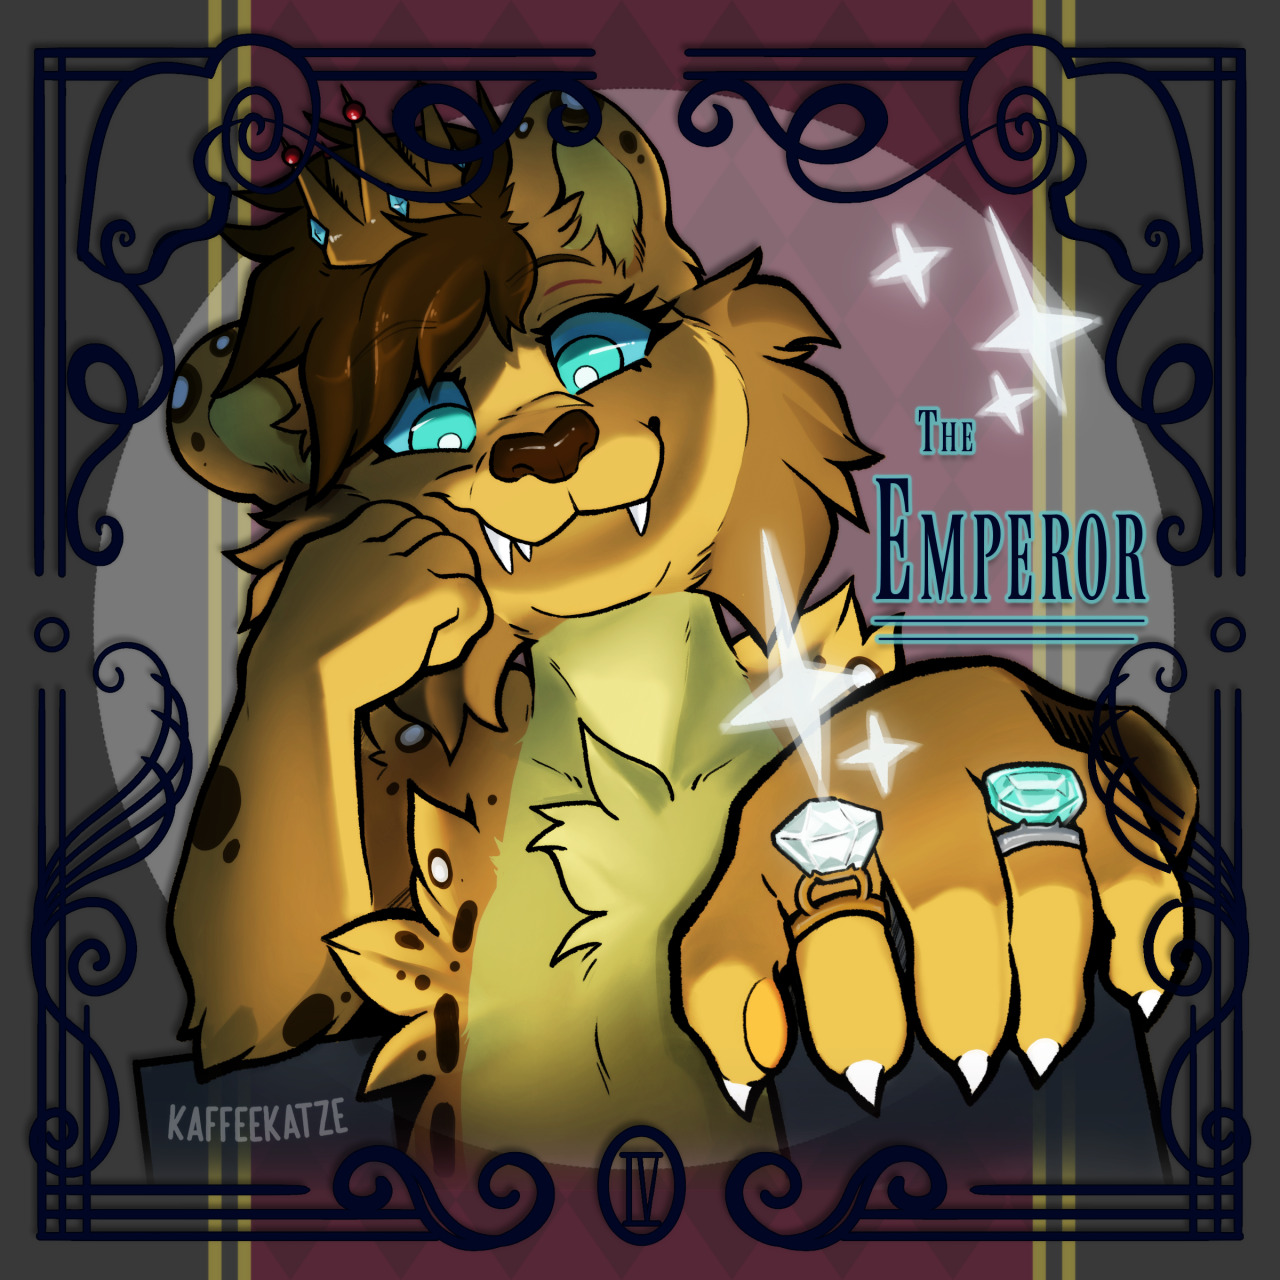 IV - THE EMPEROR - Arima

May your hard work always bring you to the top

Part of my Tarot YCH!
Some of these are rather literal, some are more fun takes on the 22 trump cards~ #tarot#art#furry#ych#anthro#avatar#digital art#lion#lioness#crown#jewels